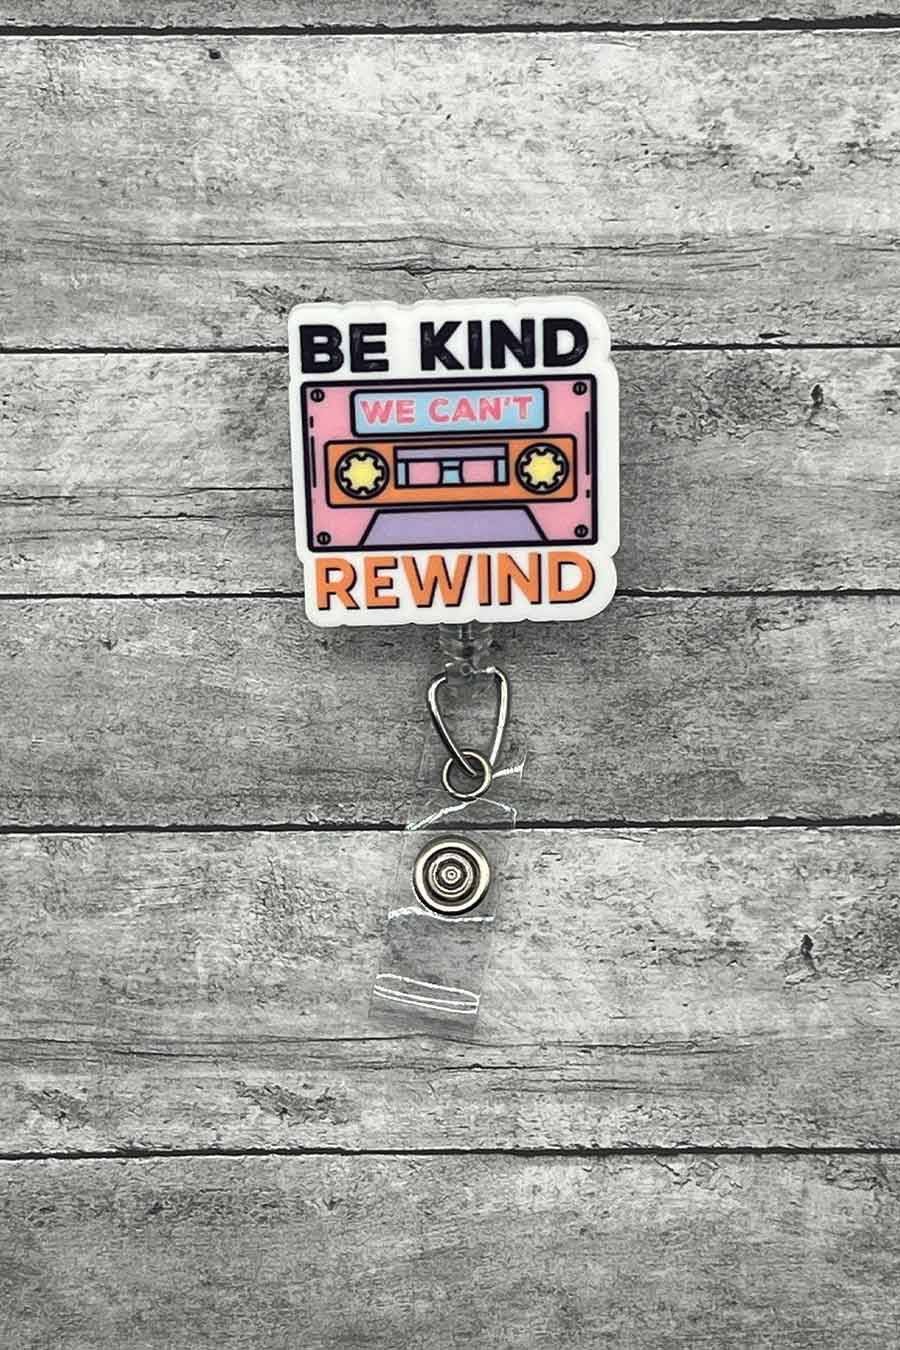 "Be Kind Rewind Badge Reel featuring a retro cassette tape design with the phrase 'Be Kind, We Can't Rewind'.